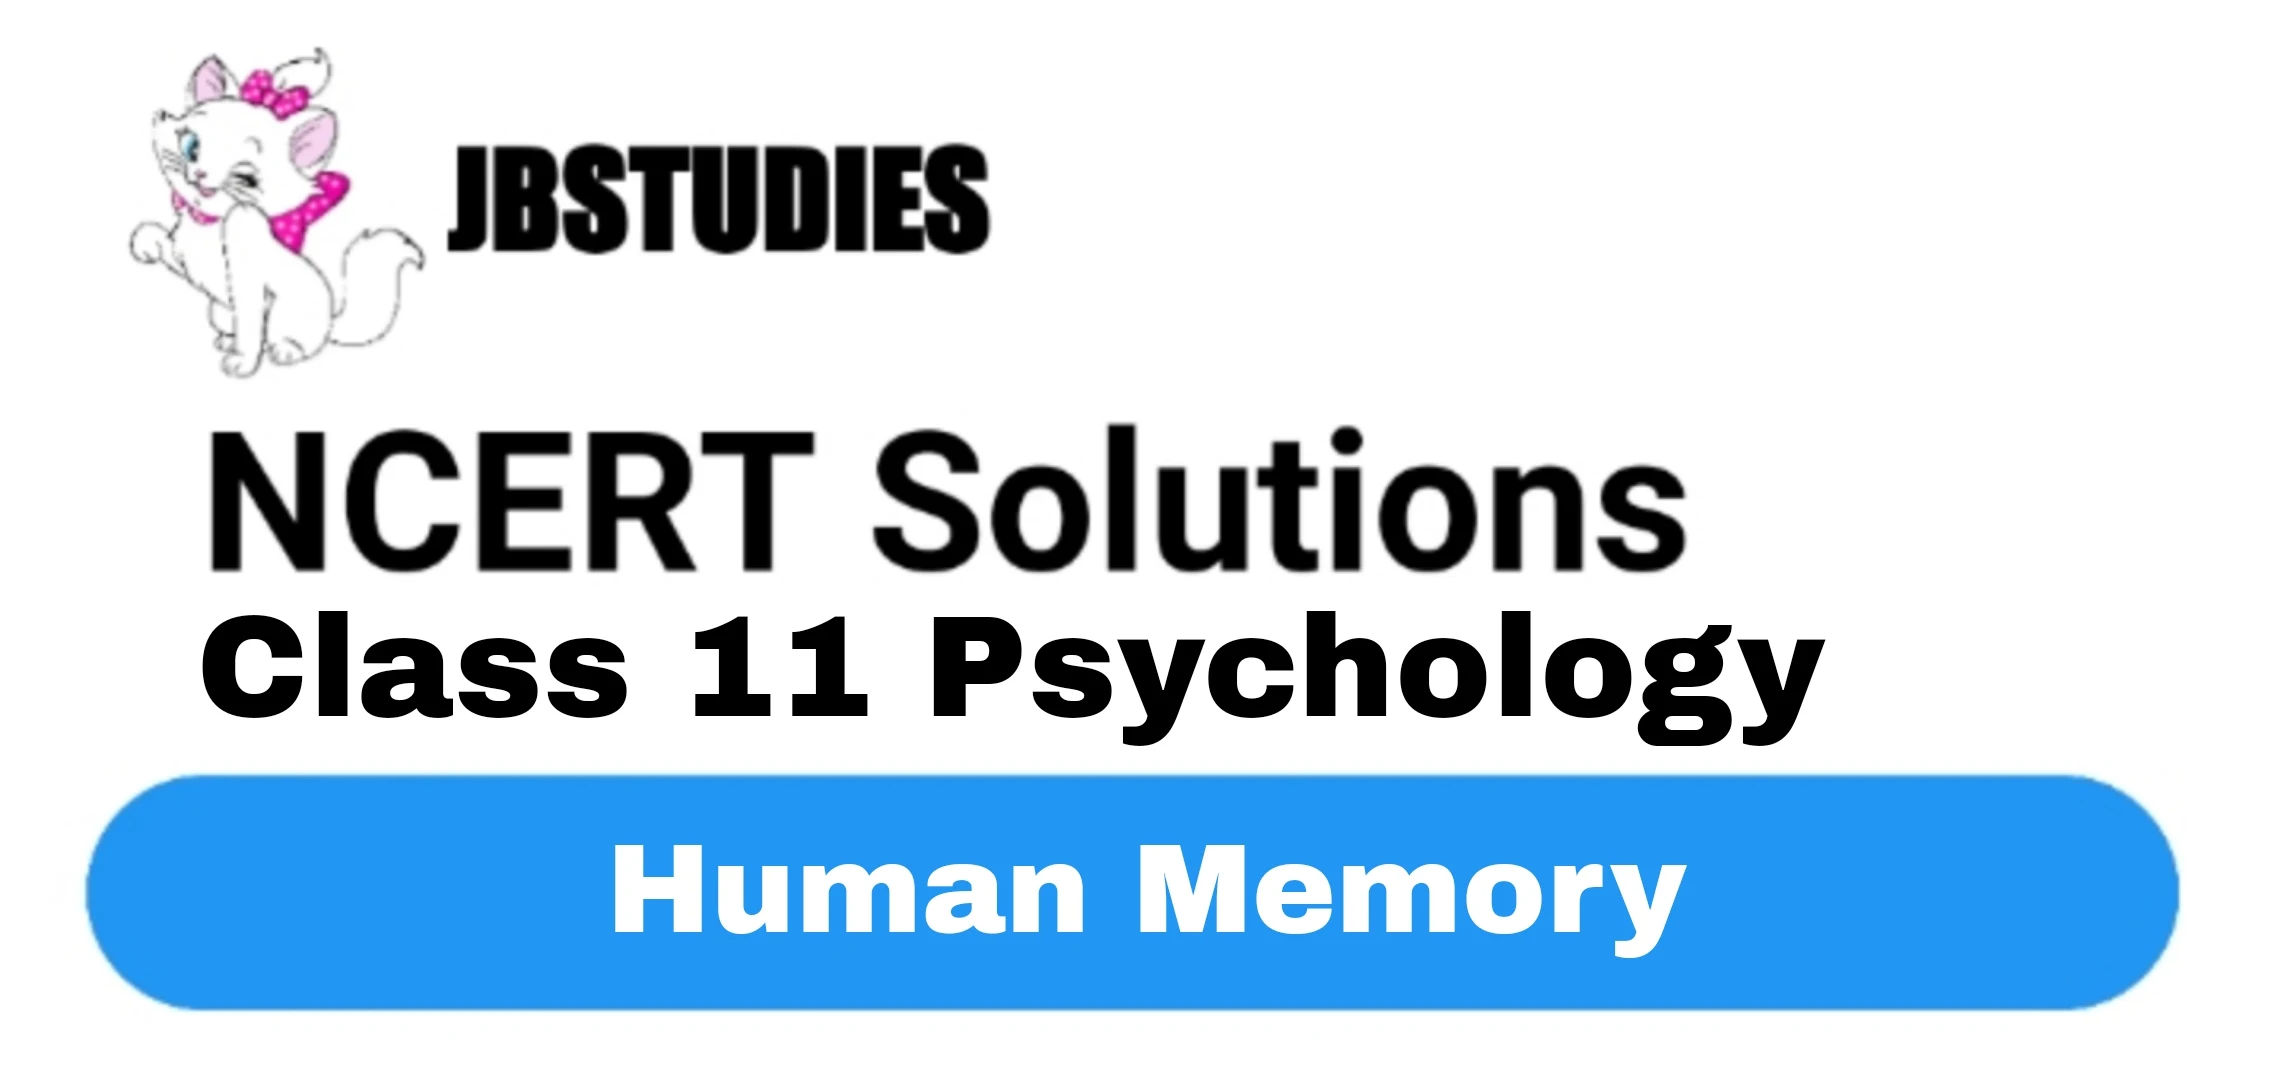 Solutions Class 11 Psychology Chapter -7 (Human Memory)